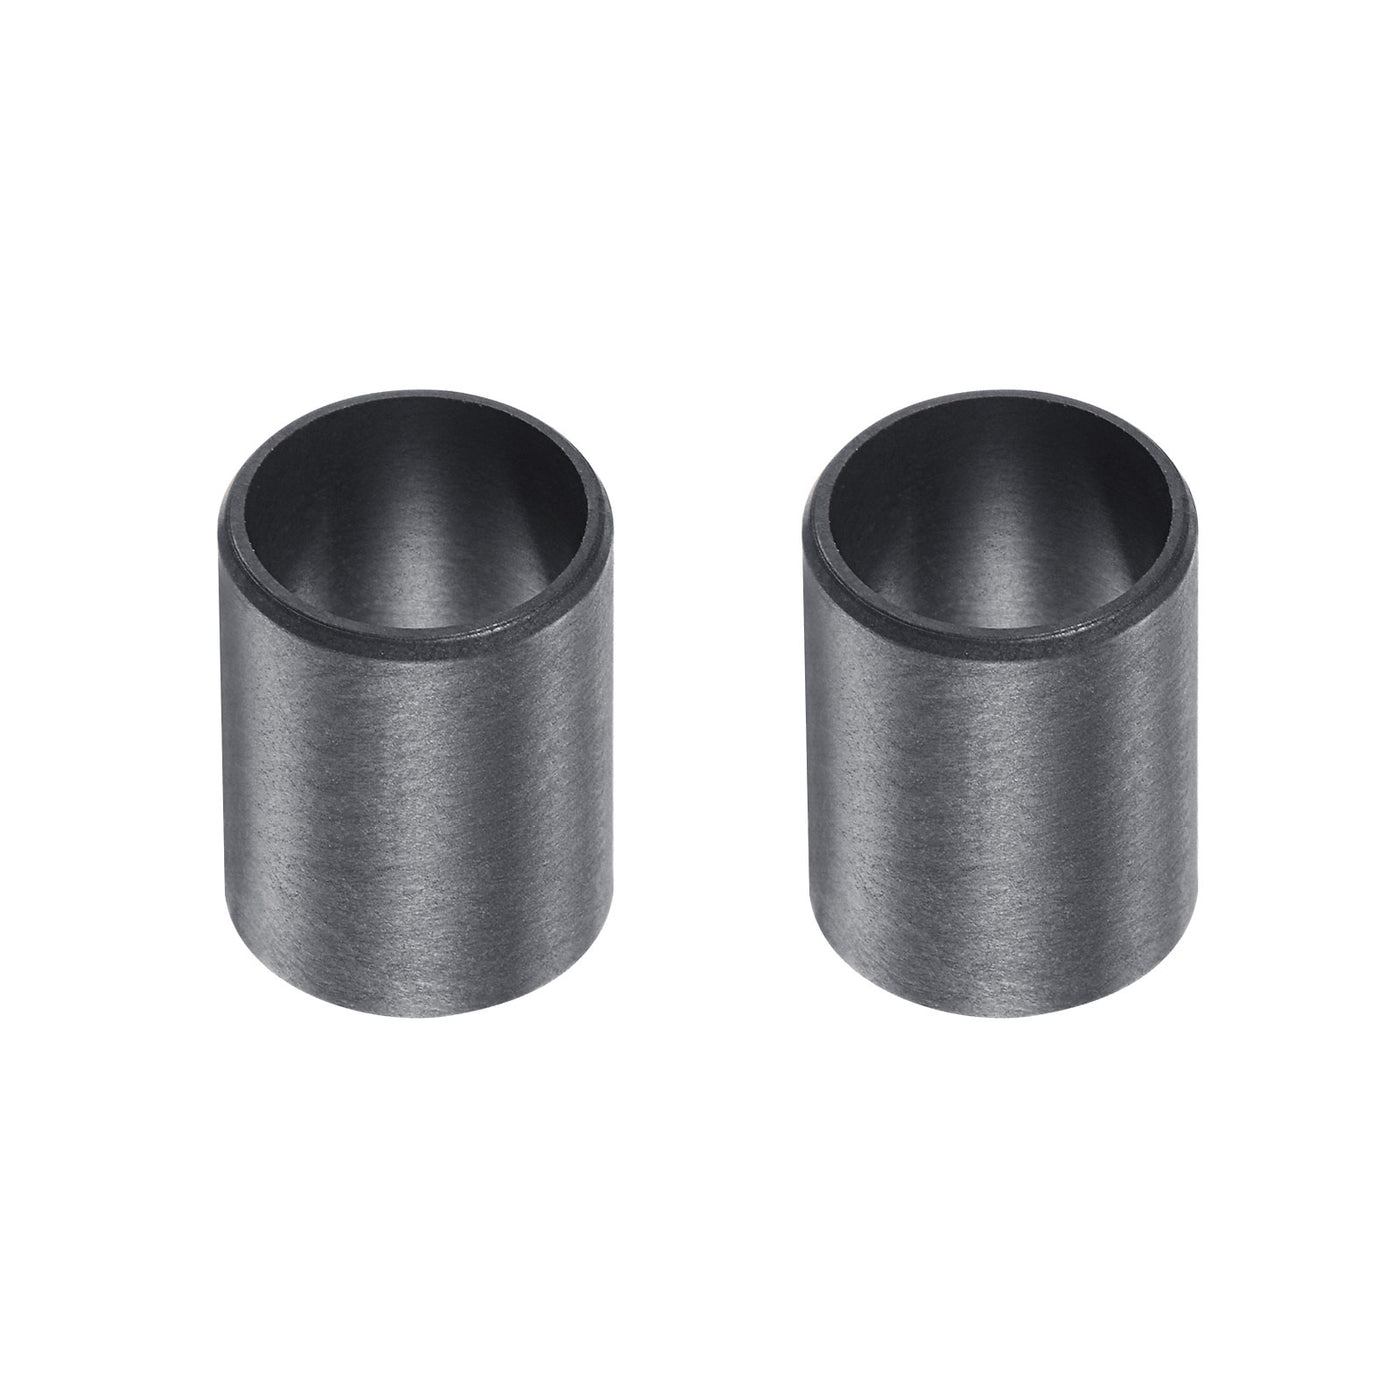 uxcell Uxcell Sleeve Bearings 12mmx14mmx20mm POM Wrapped Oilless Bushings Black 2pcs